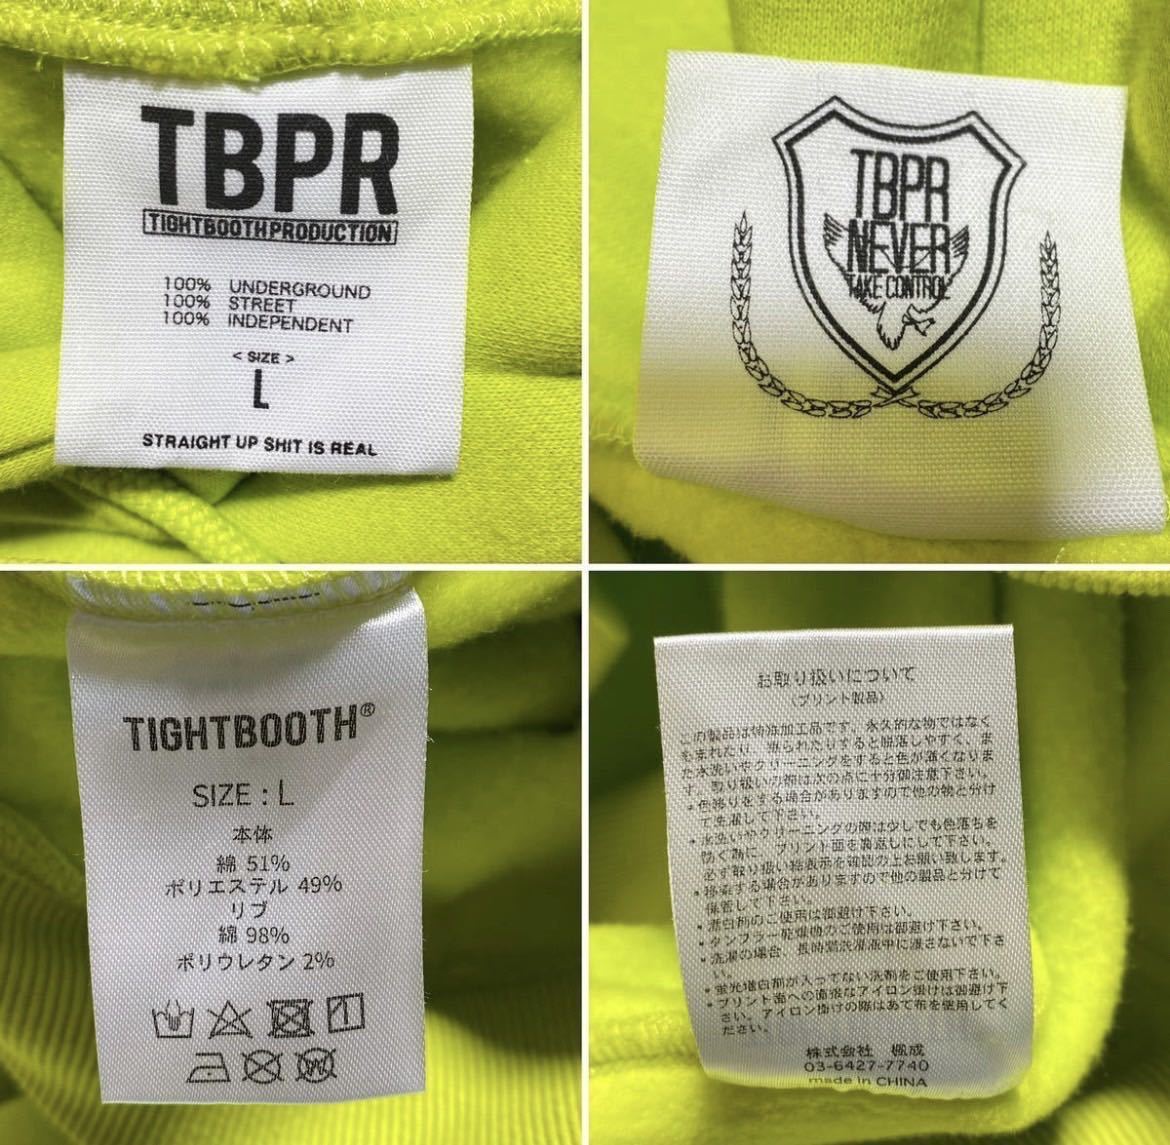 【L】TIGHTBOOTH PRODUCTION STAIGHT UP HOODIE タイトブース プロダクション パーカー イエロー R1766_画像4